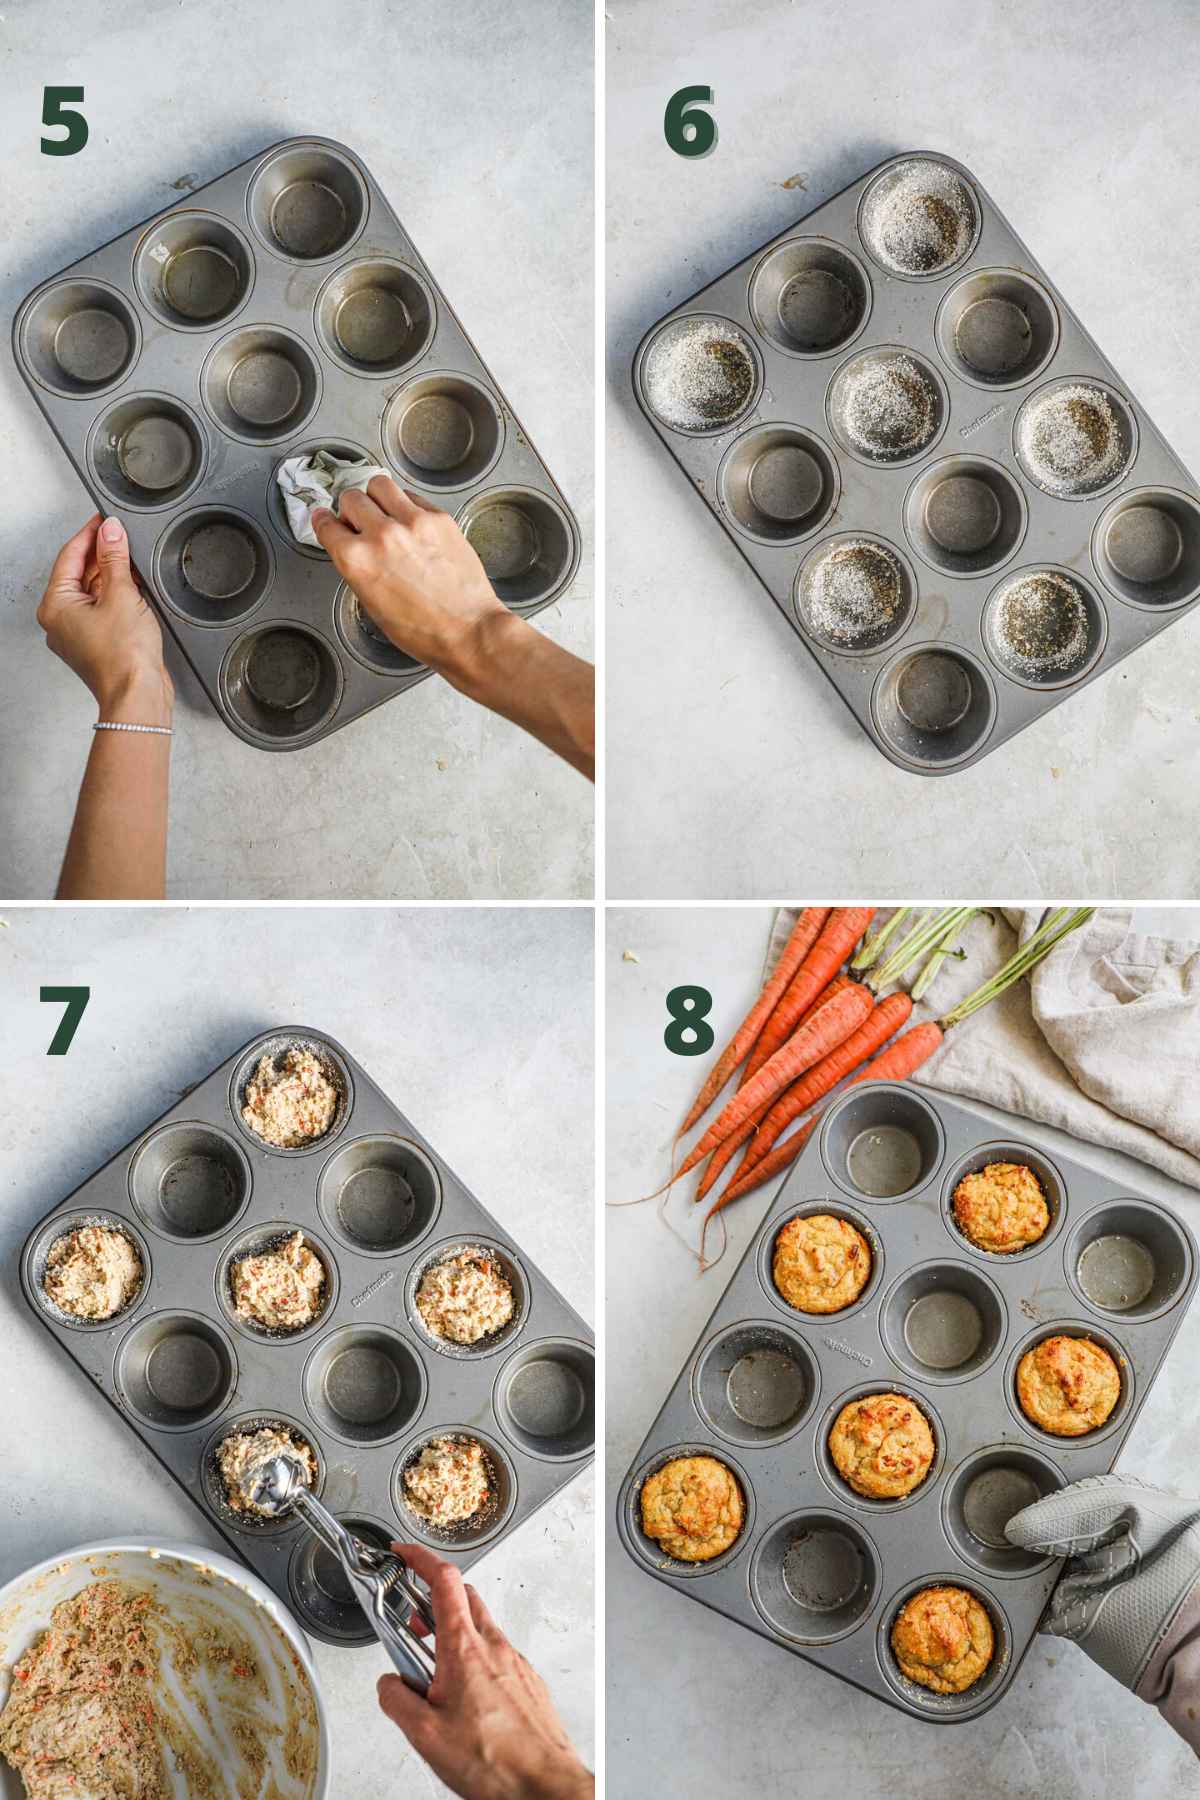 Steps to make dog cakes, grease and flour or line muffin tin, add batter to muffin tin, bake.